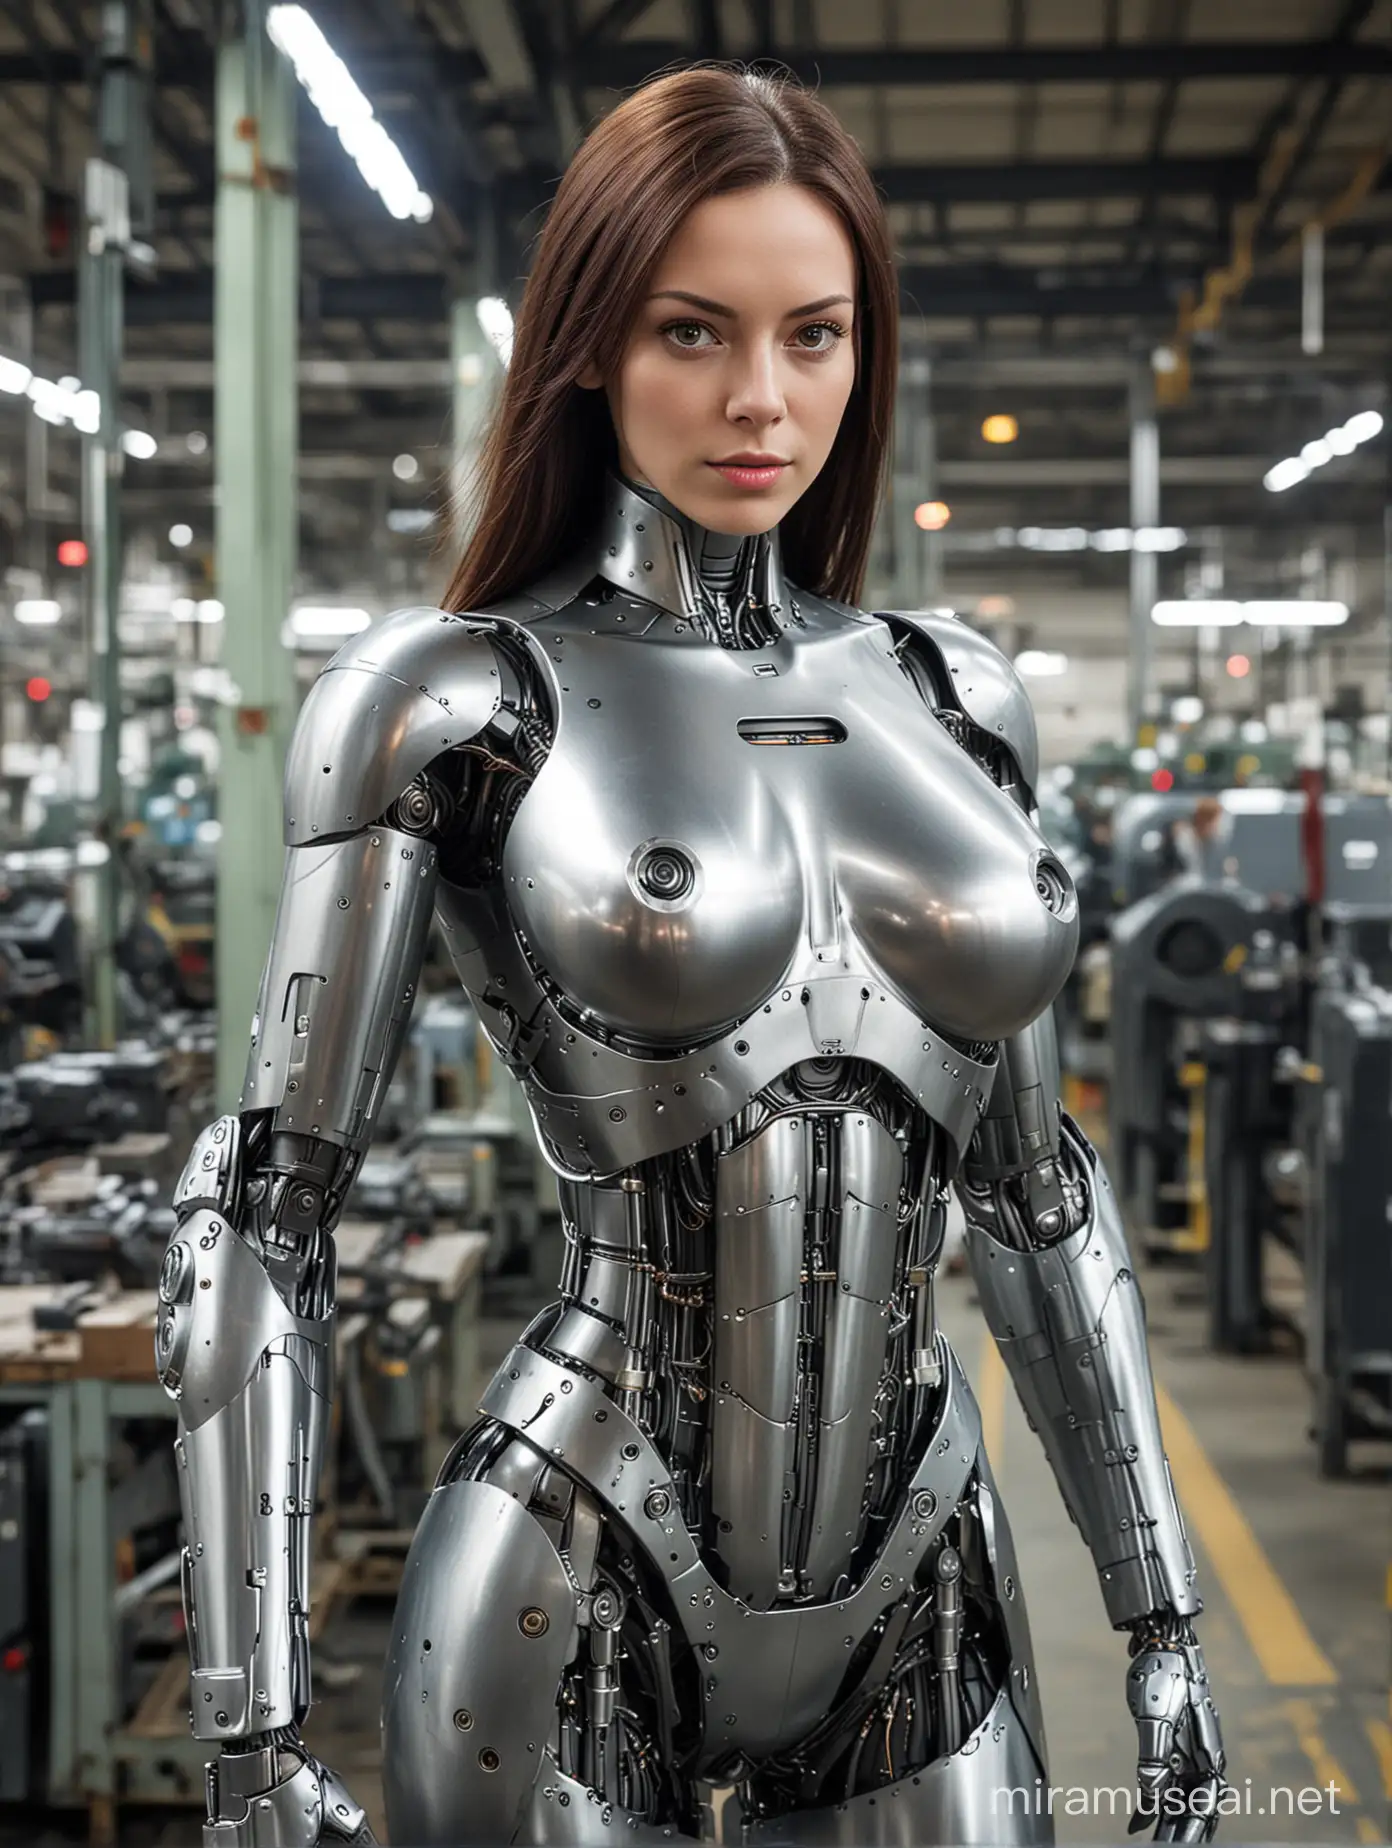 metal android with large human breasts, factory floor